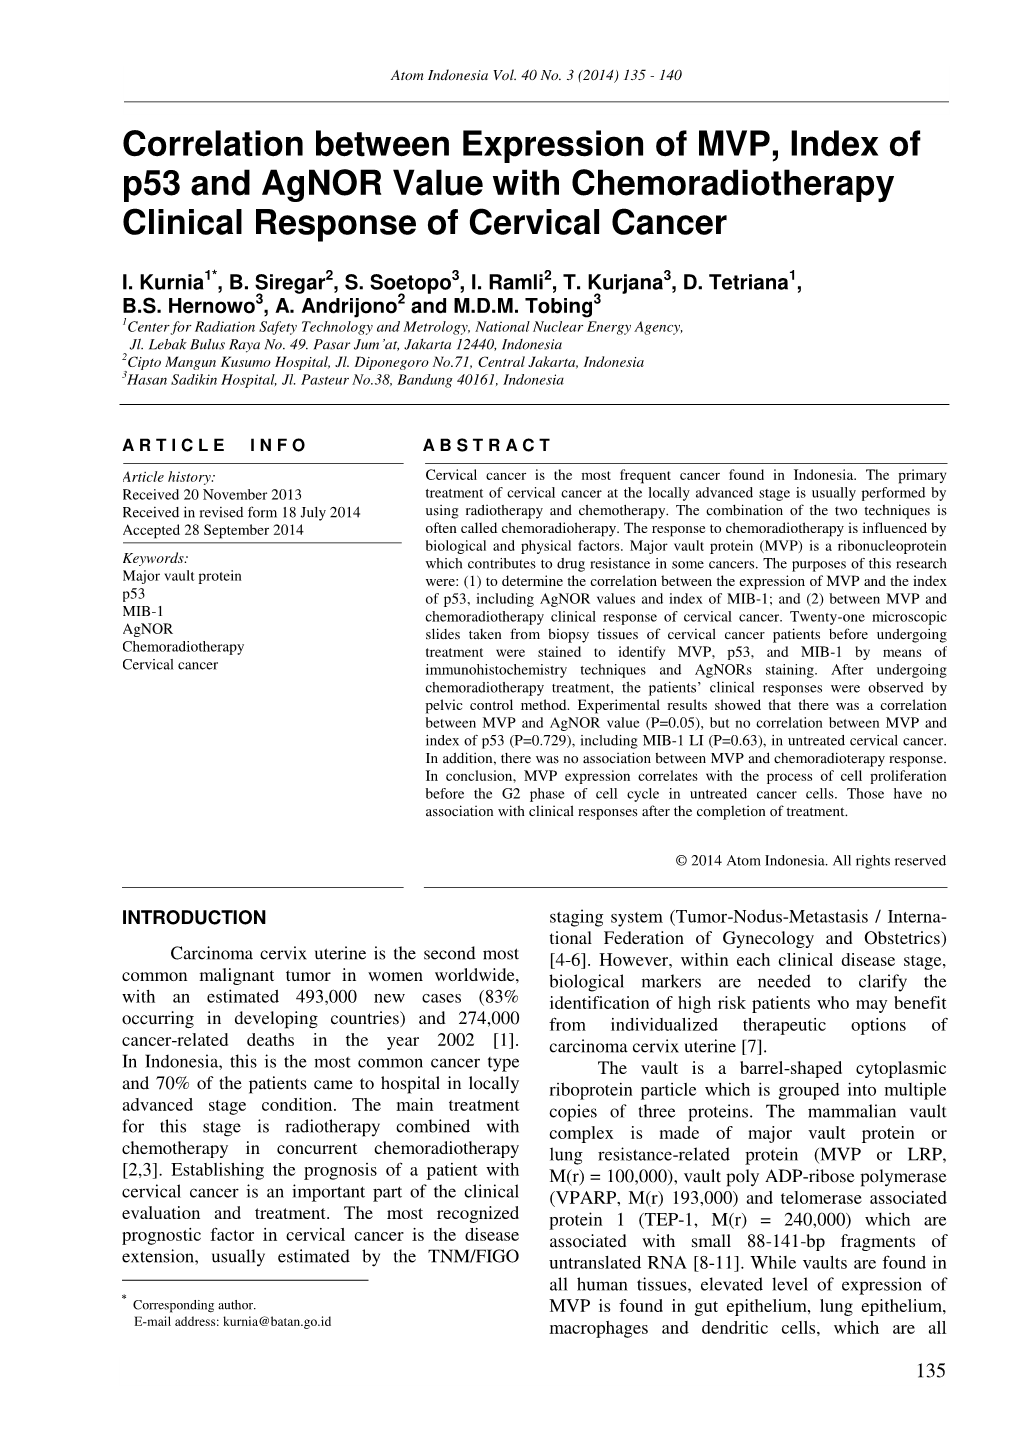 Correlation Between Expression of MVP, Index of P53 and Agnor Value with Chemoradiotherapy Clinical Response of Cervical Cancer